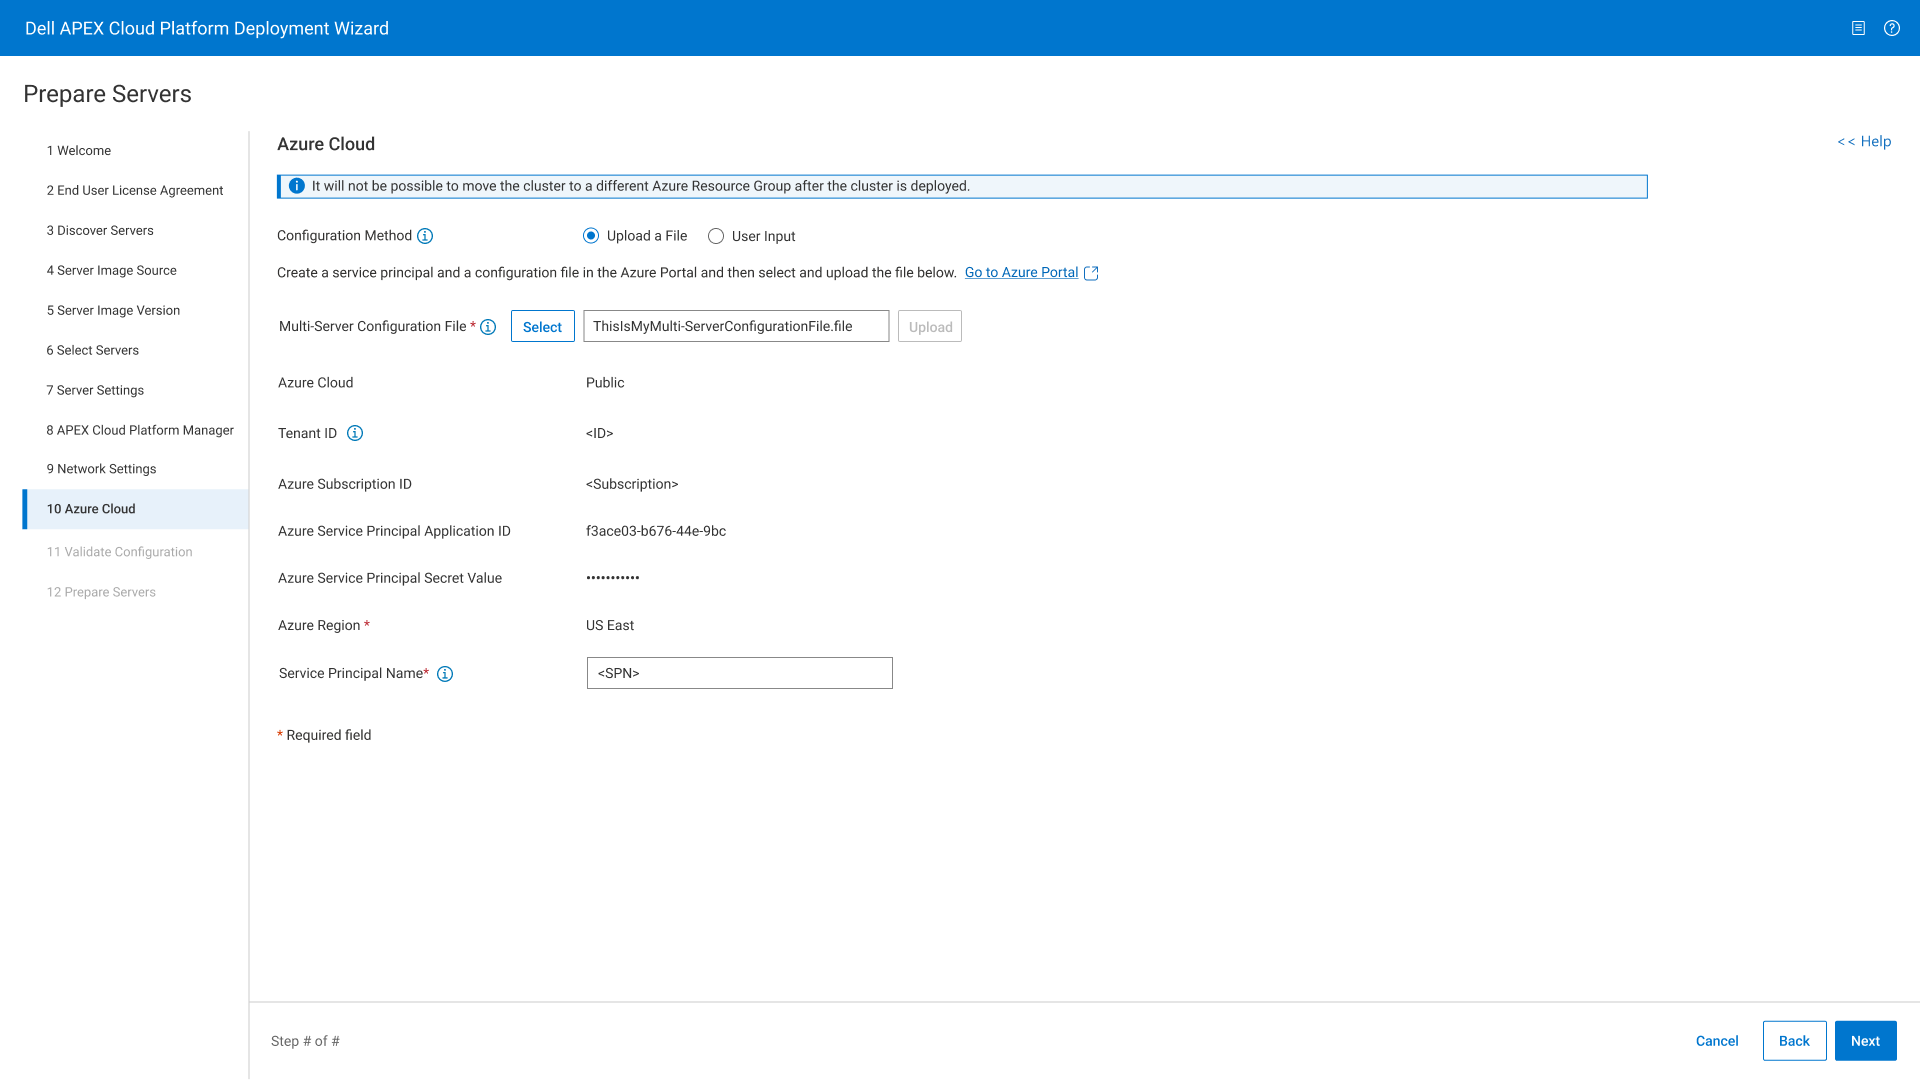 A screenshot of the Azure Stack HCI registration step in the APEX Cloud Platform Foundation Software deployment wizard.